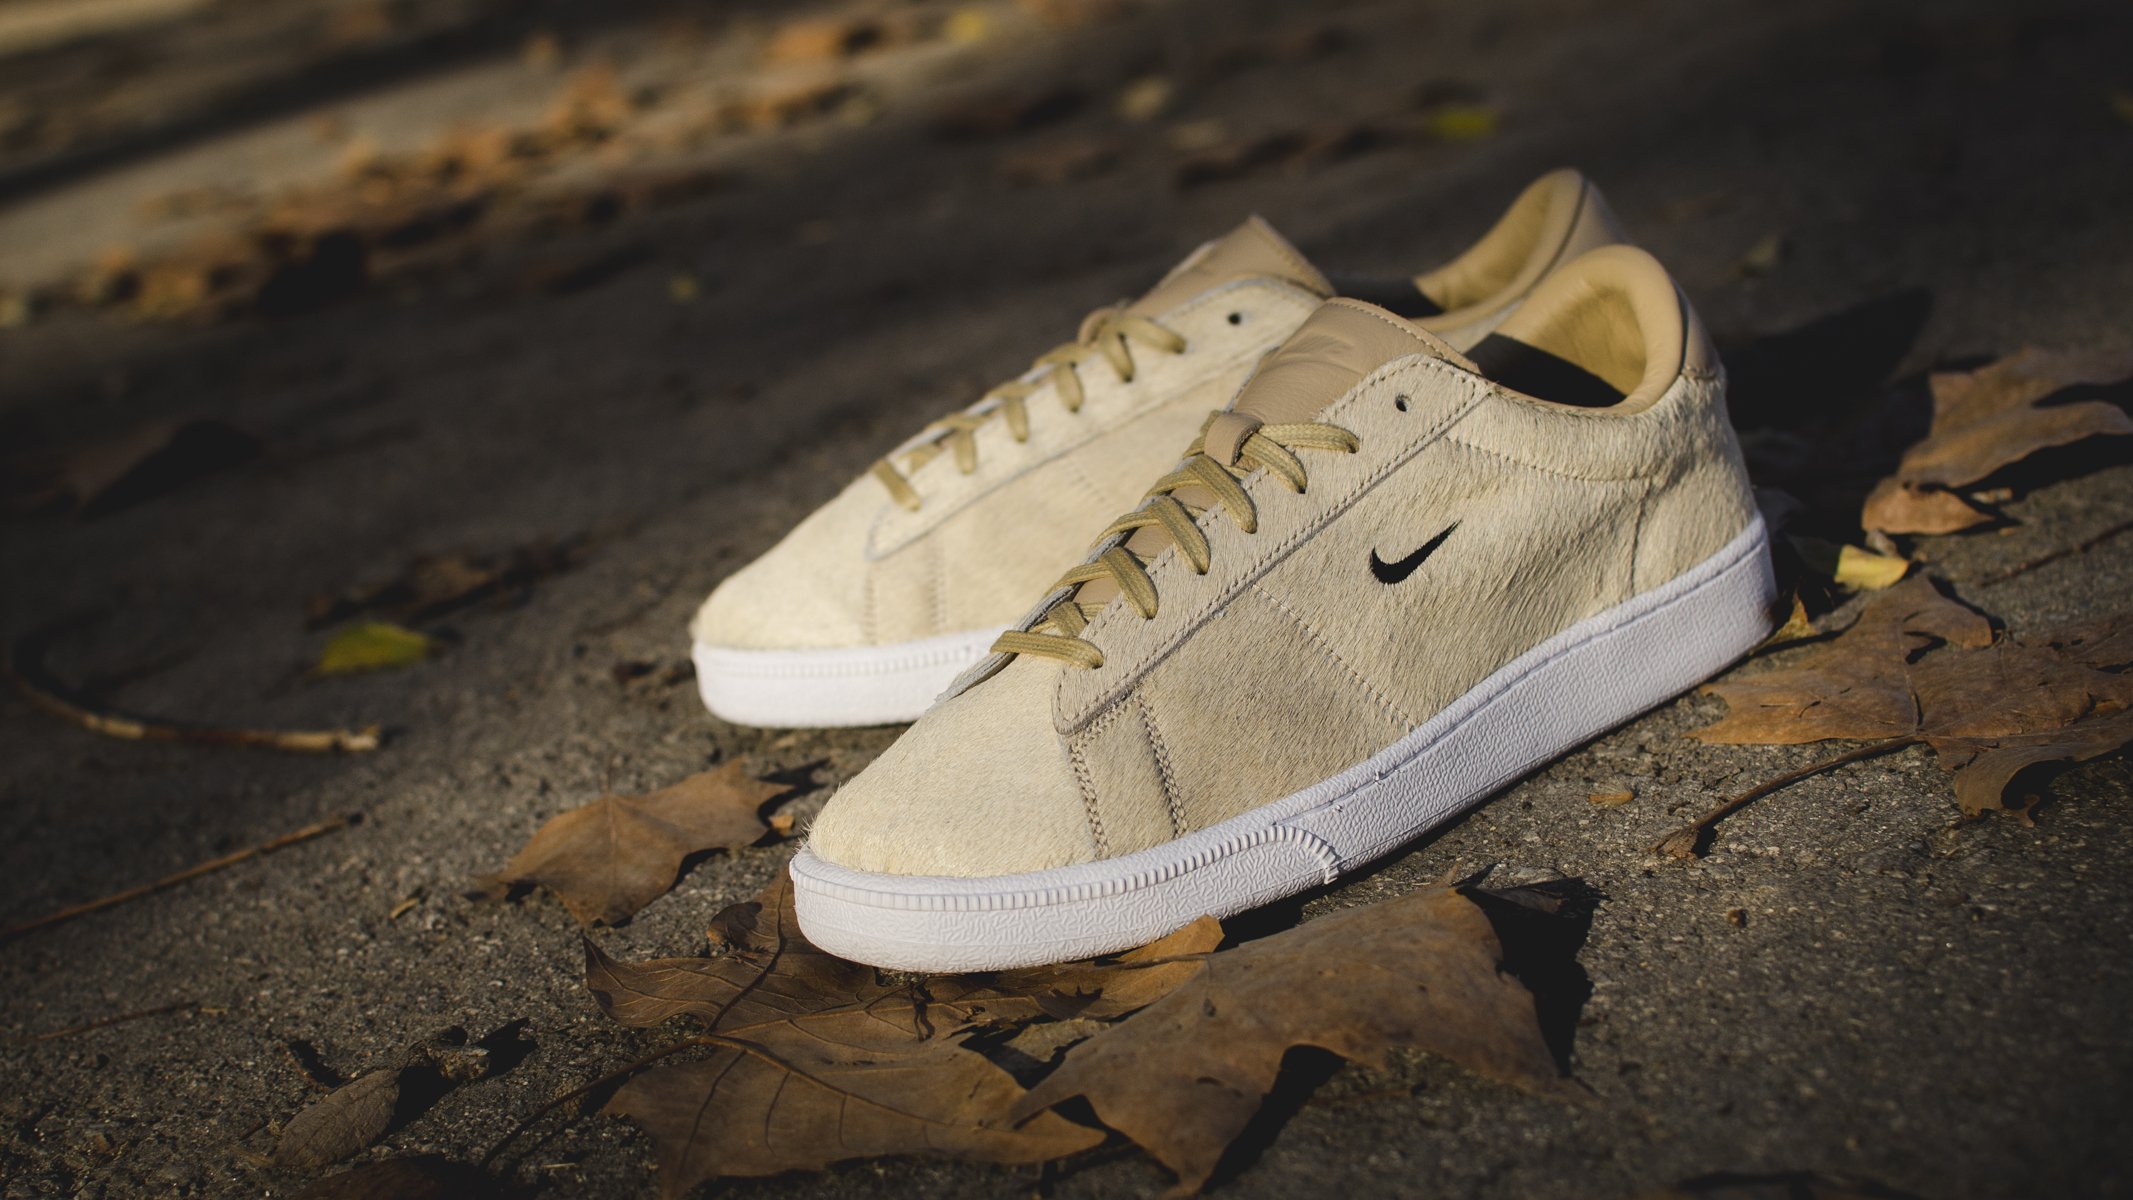 sivasdescalzo on Twitter: "Nike Tennis Classic CS LX Featuring a Premium pony upper! Available instore &amp; online: https://t.co/oBGjkDa3Y3 https://t.co/ffWTSFOm8S" /